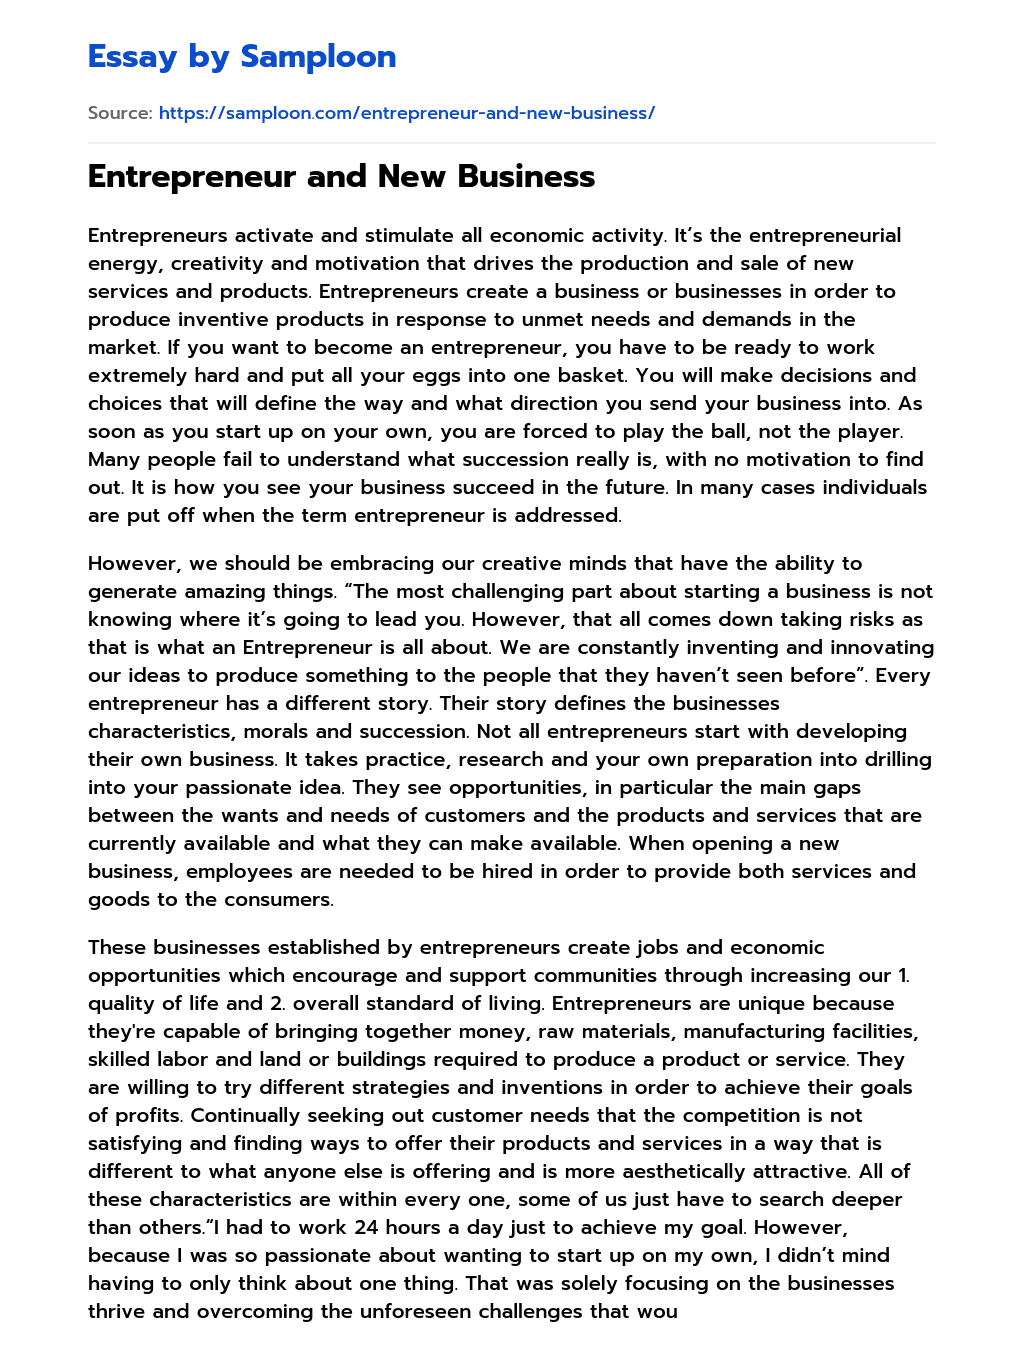 Entrepreneur and New Business essay